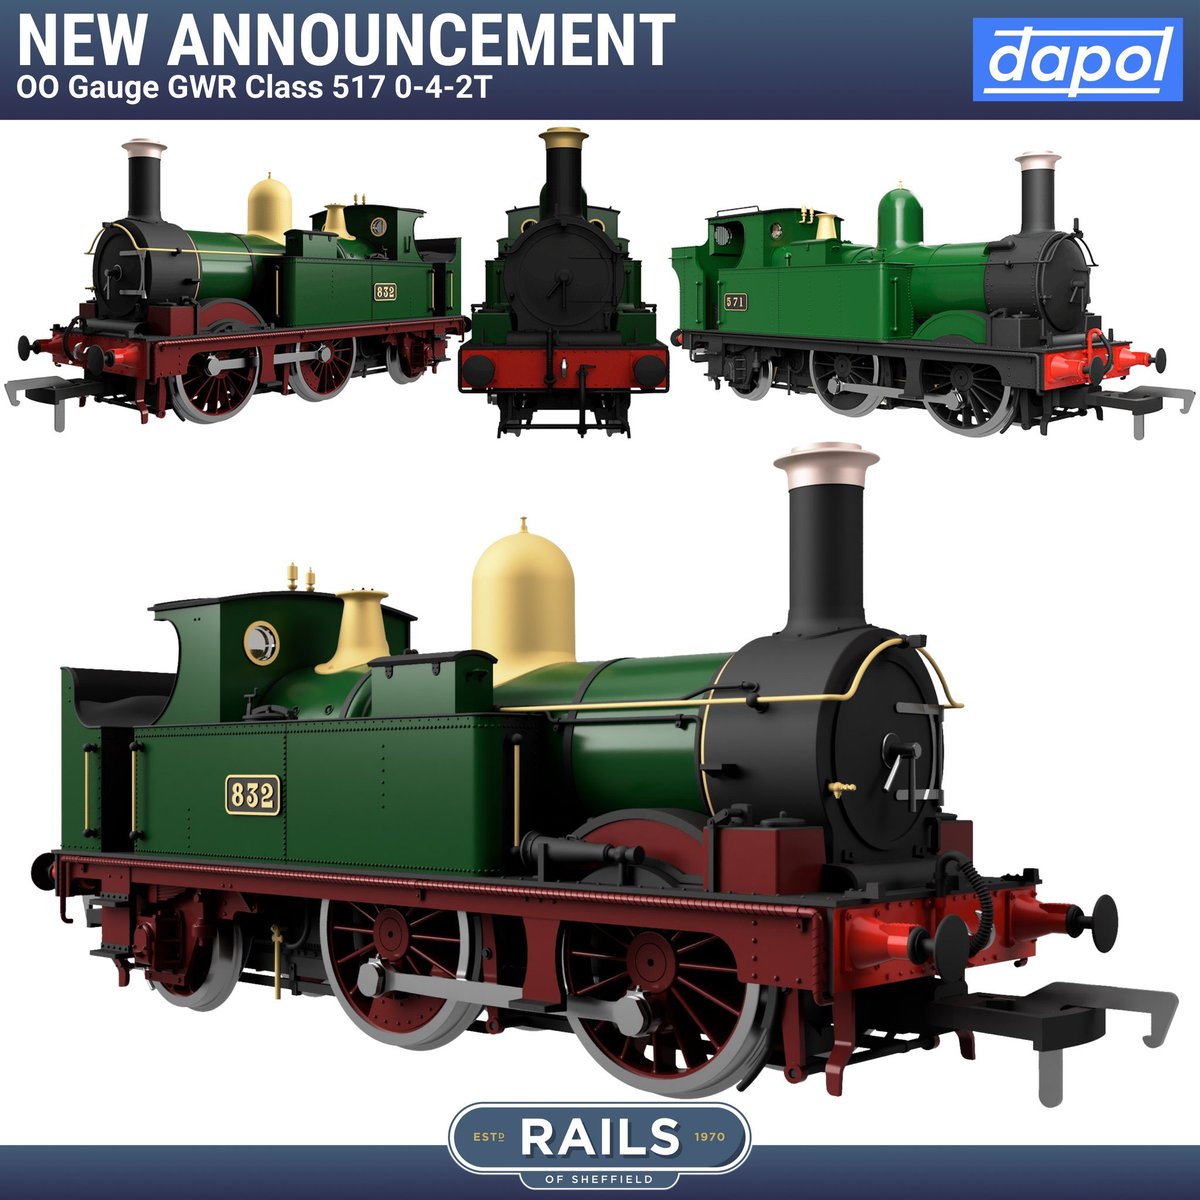 Dapol on its way to becoming manufacture of the year I fear